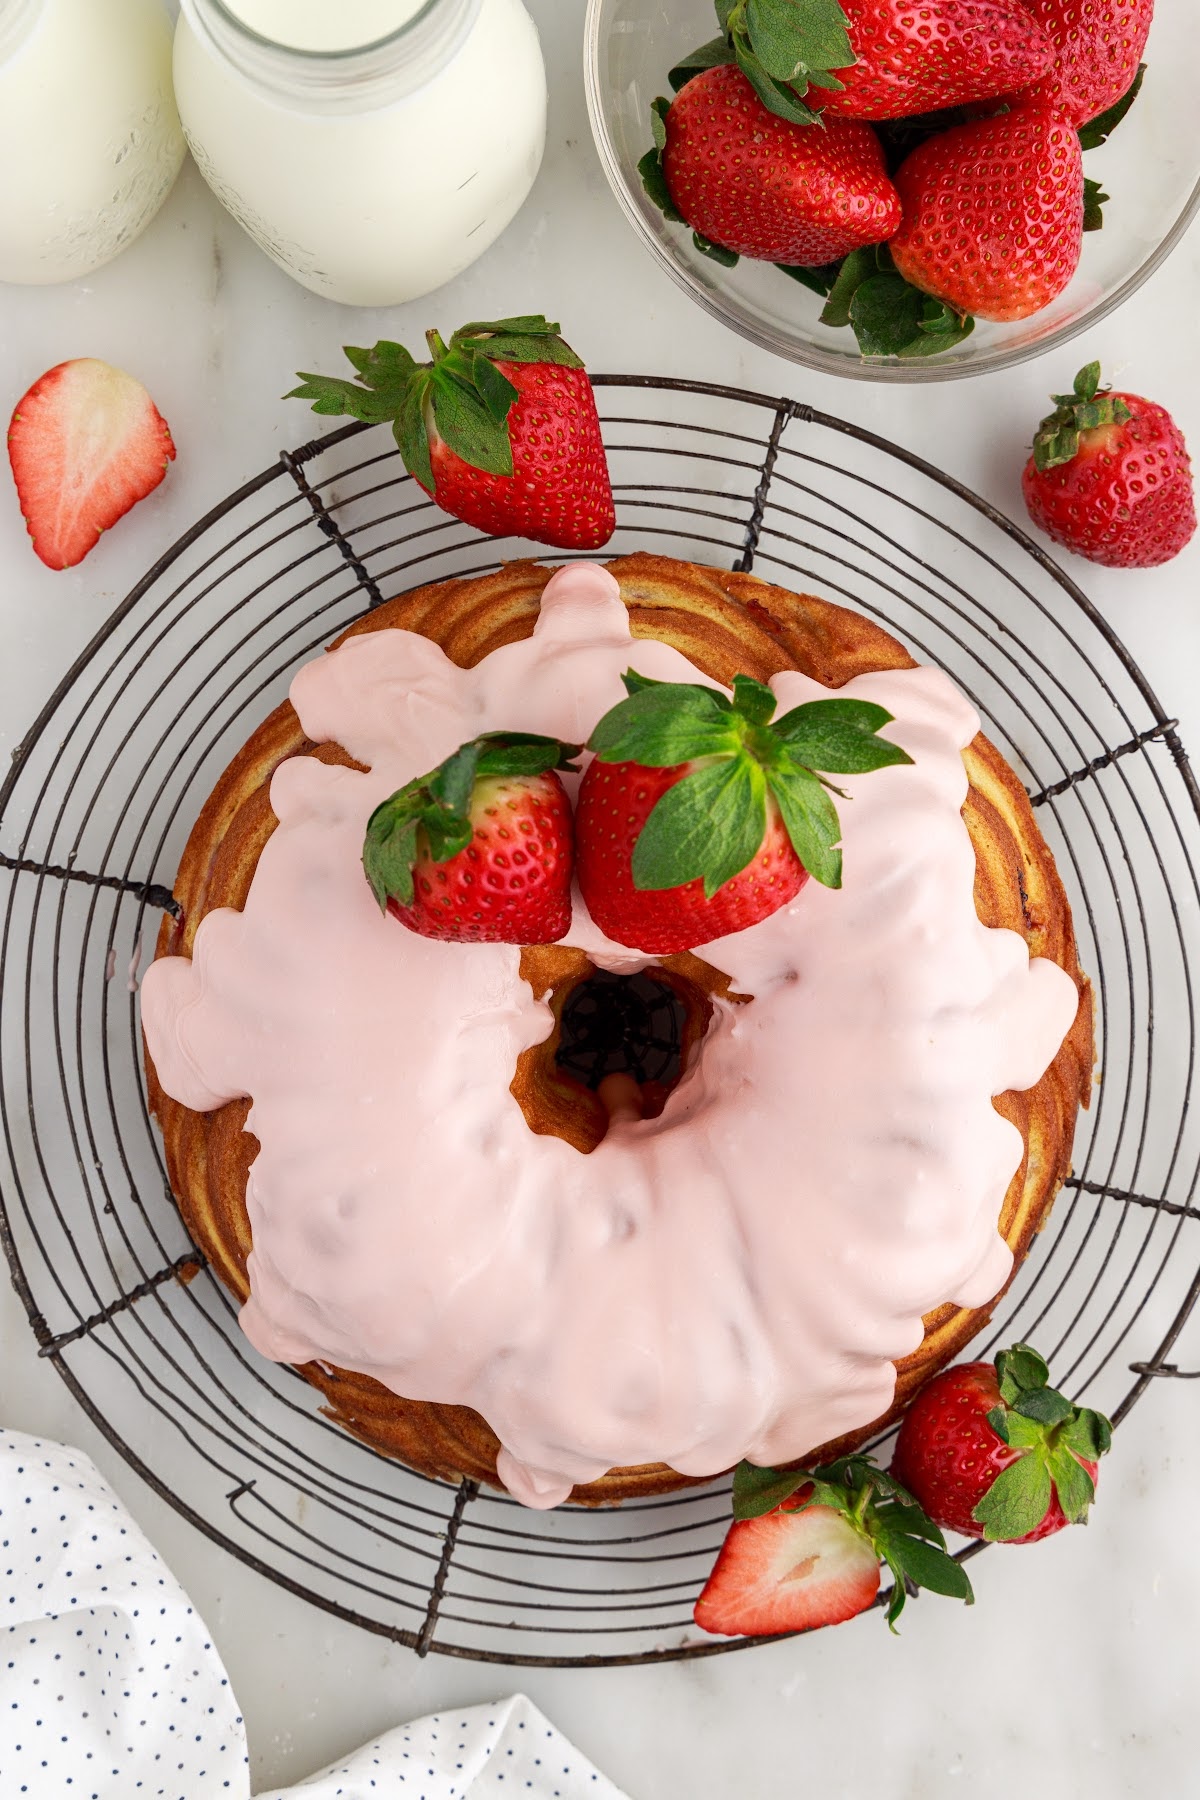 Overhead view of a Strawberry Bundt Cake with strawberries on top.